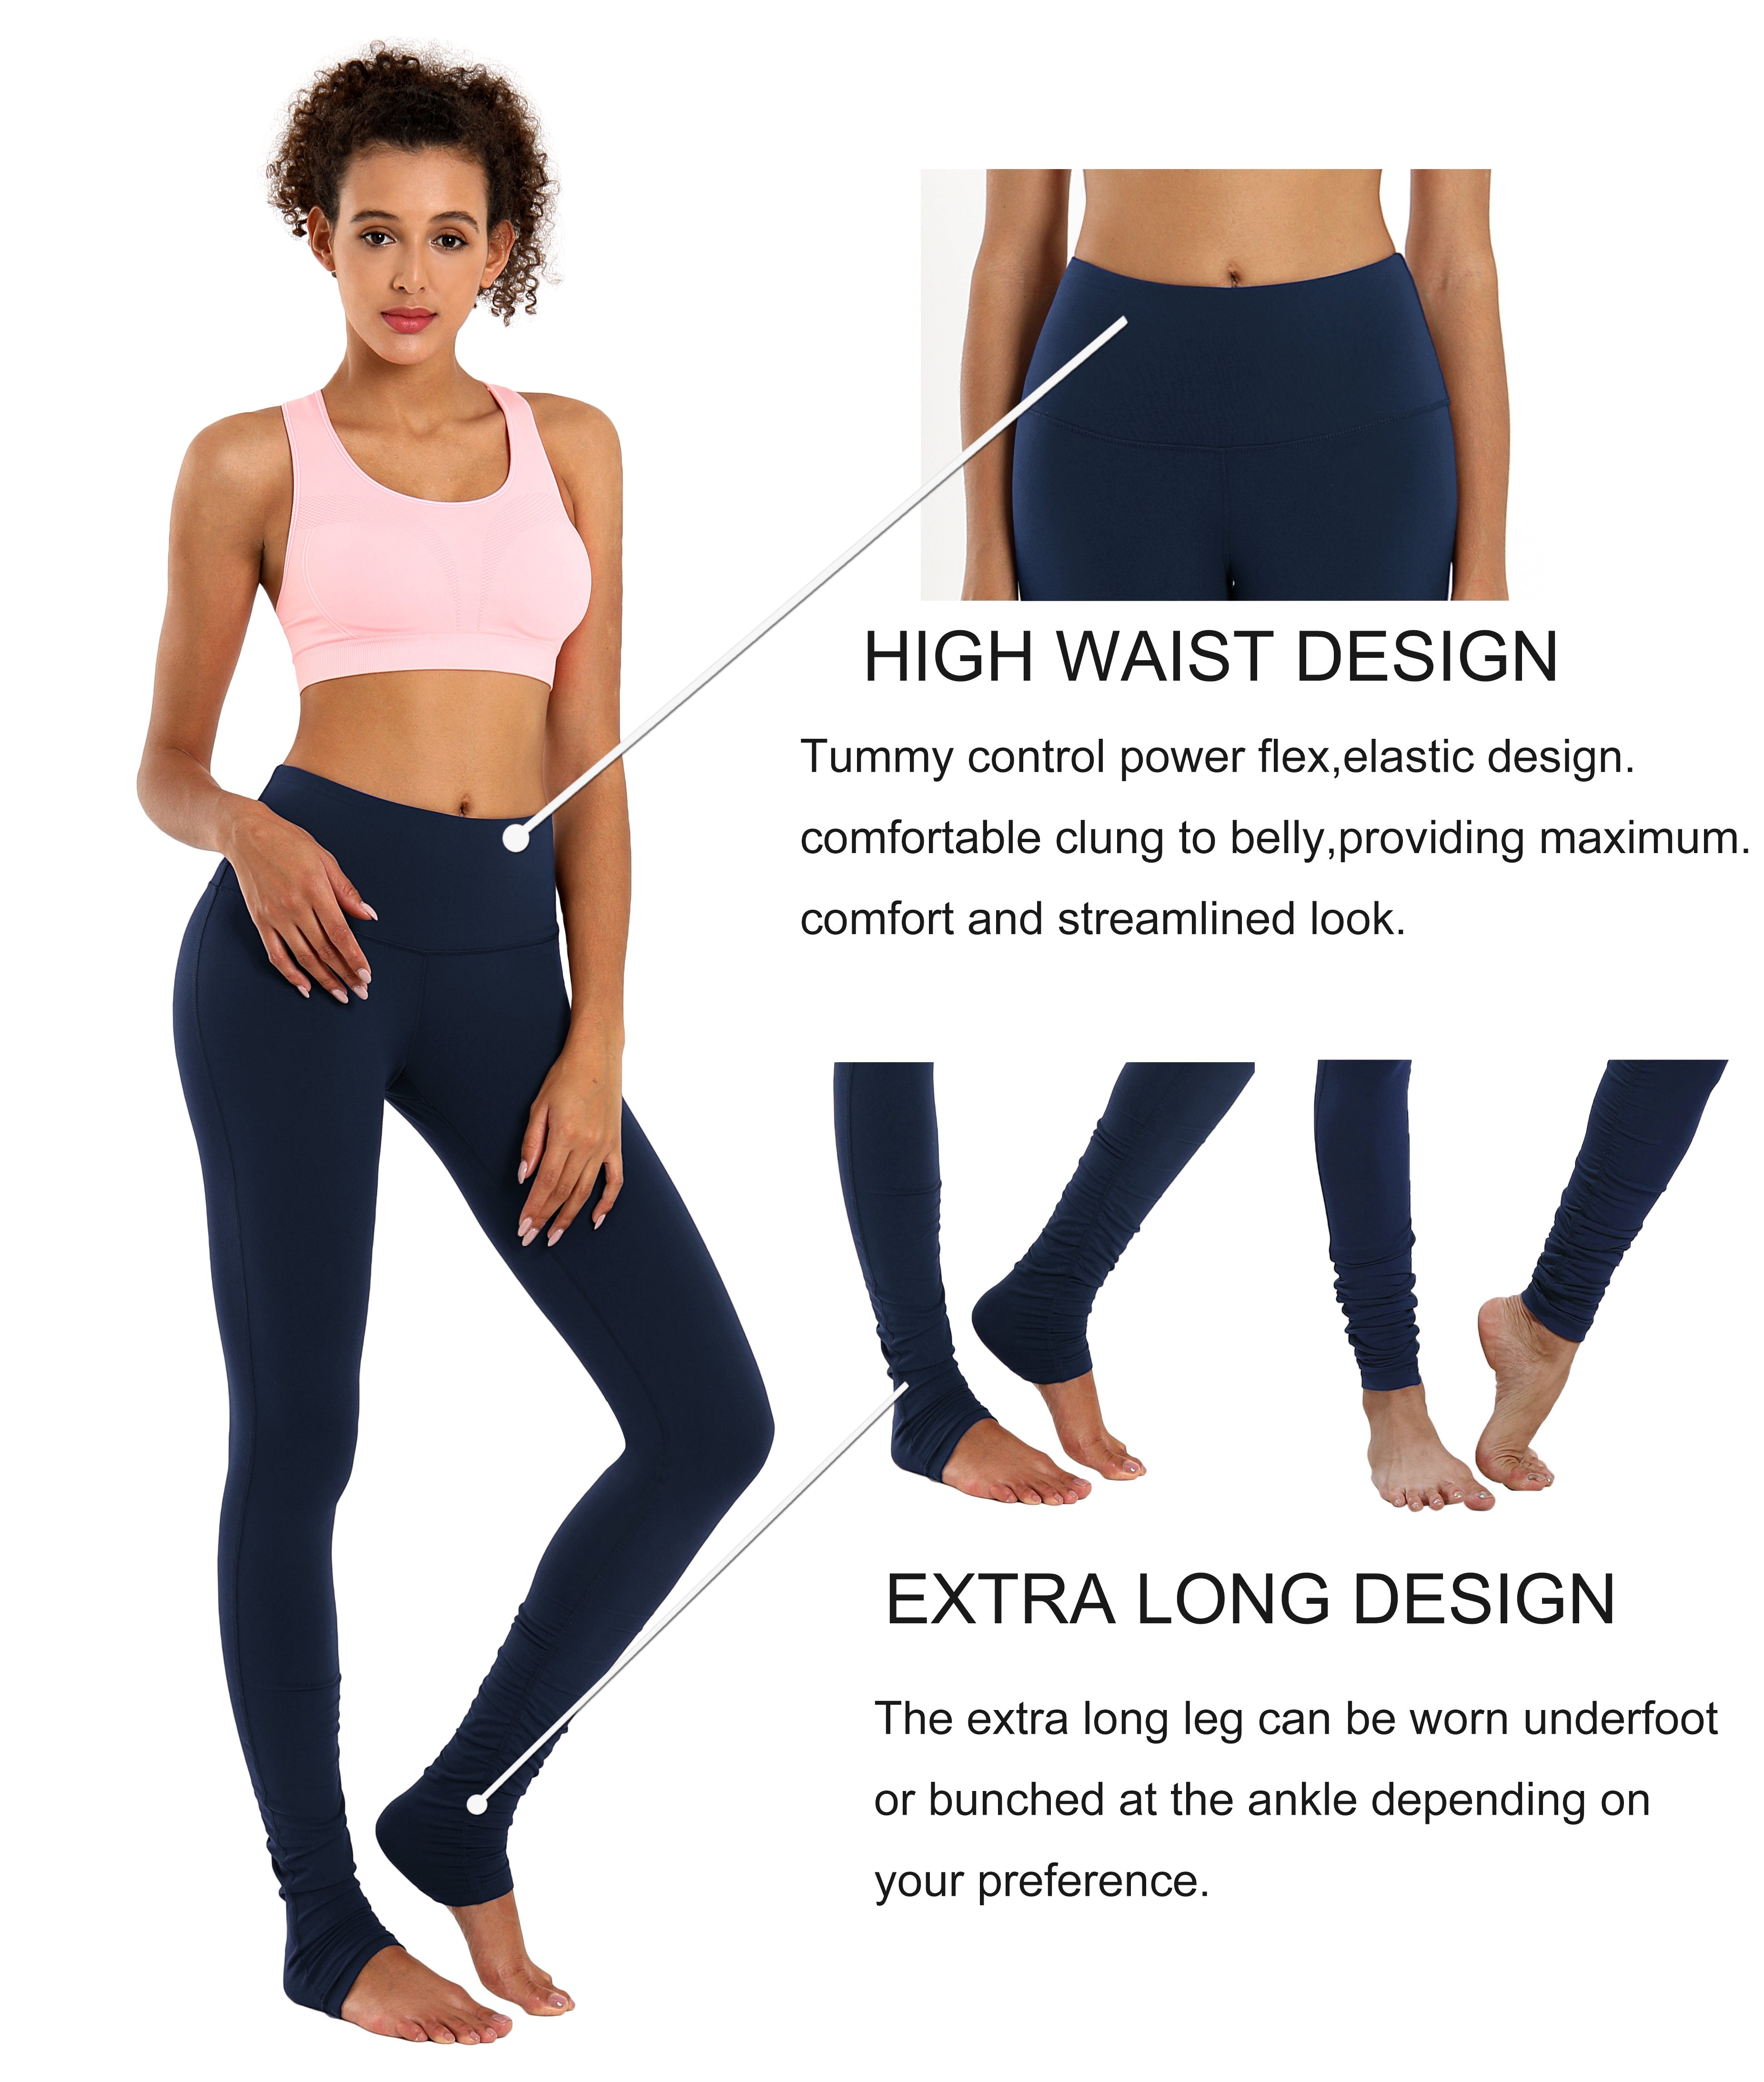 Over the Heel Pilates Pants darknavy Over the Heel Design 87%Nylon/13%Spandex Fabric doesn't attract lint easily 4-way stretch No see-through Moisture-wicking Tummy control